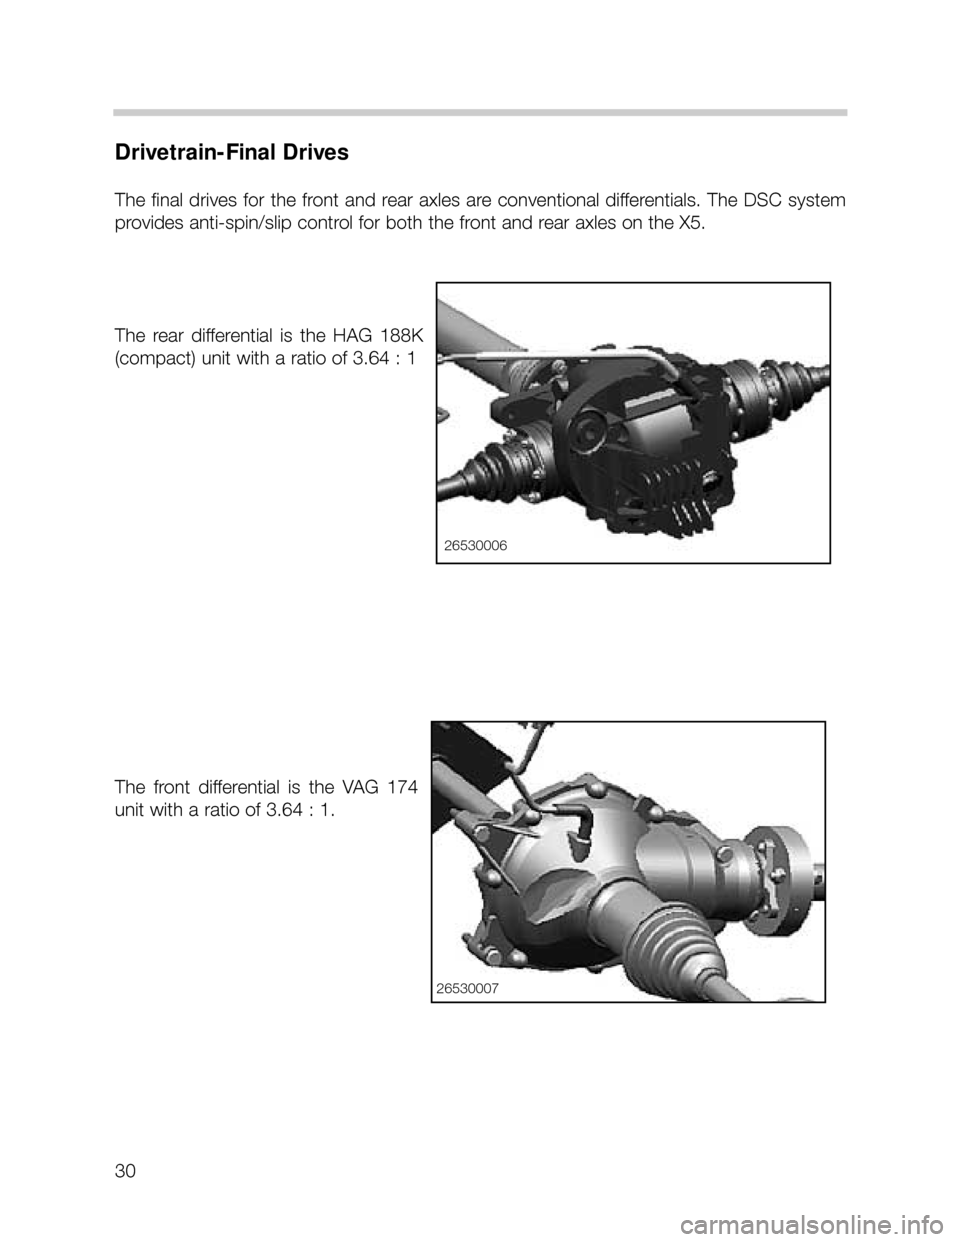 BMW X5 2000 E53 Owners Manual 30
Drivetrain-Final Drives
The final drives for the front and rear axles are conventional differentials. The DSC system
provides anti-spin/slip control for both the front and rear axles on the X5.
The